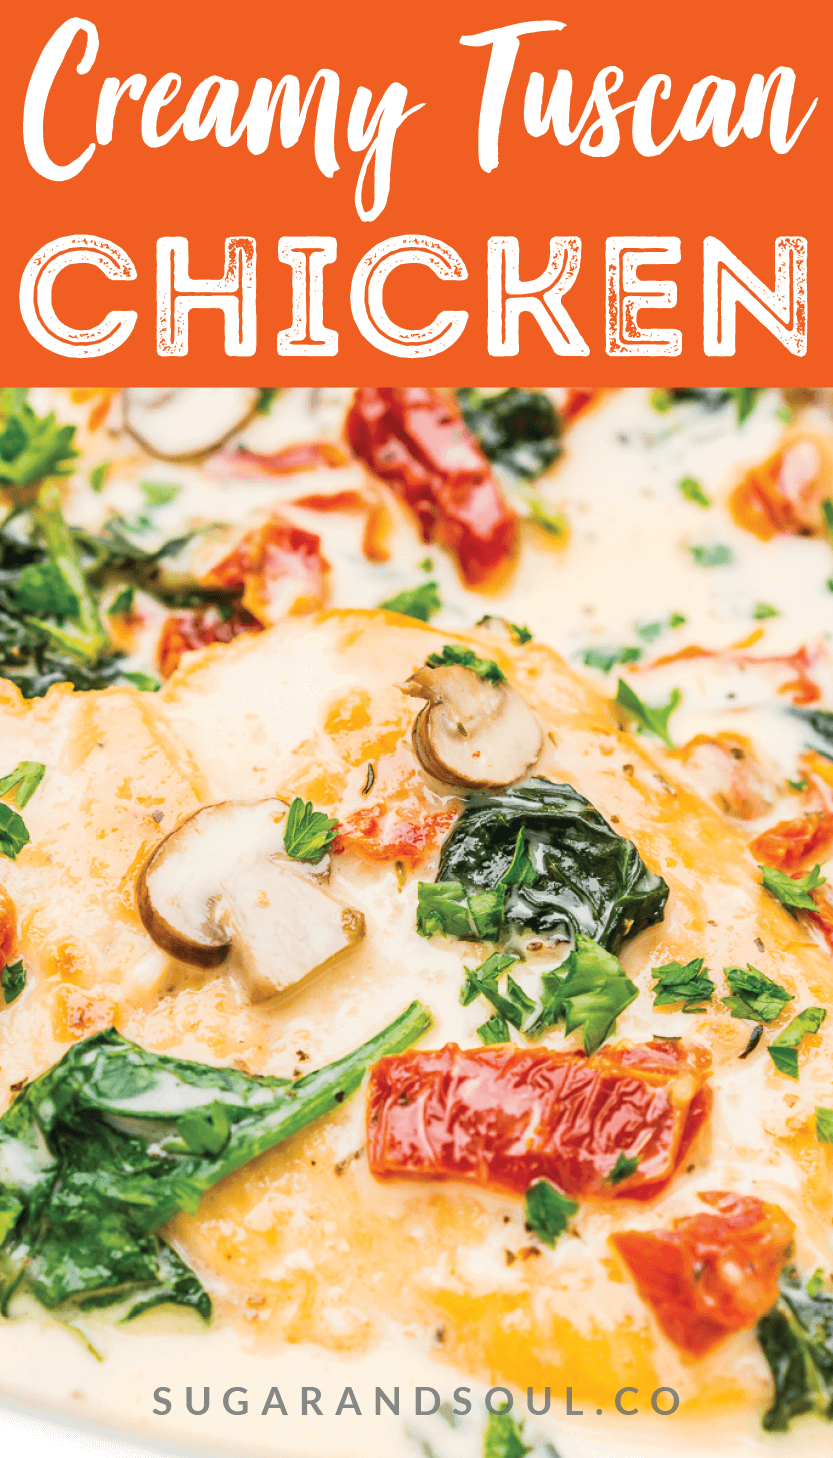 Creamy Tuscan Chicken is a gourmet homemade meal that takes just 30 minutes! Made with chicken, sundried tomatoes, spinach, mushrooms, spices, cheese, and heavy cream, this is a perfect family-friendly recipe to whip up on any night of the week. via @sugarandsoulco